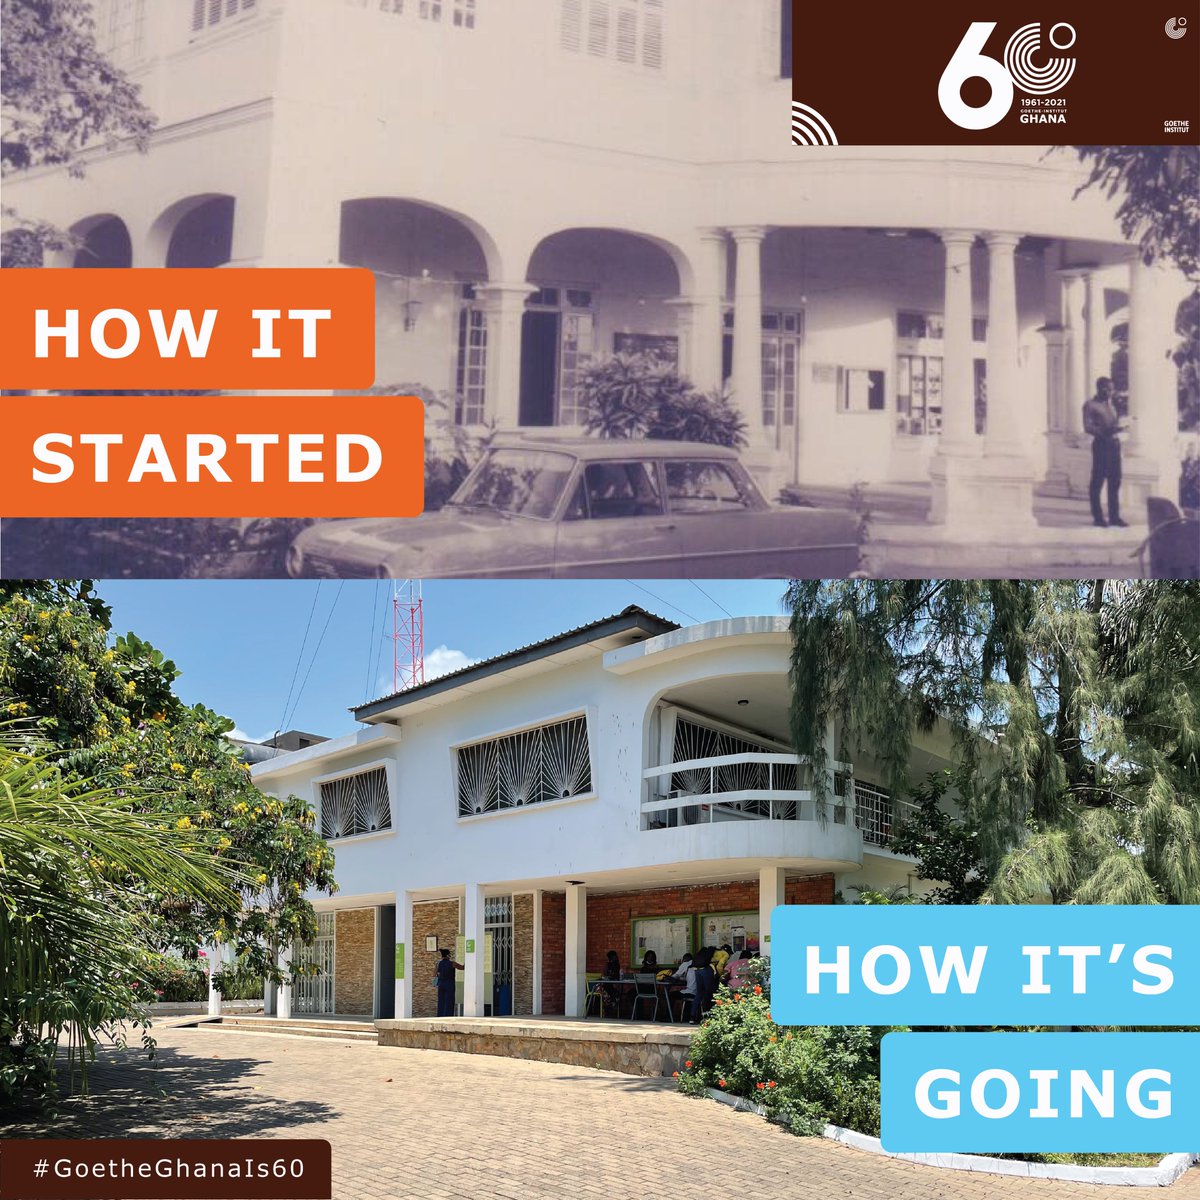 How It Started vs How It’s Going. 

A Picture of the Goethe-Institut Ghana then, vs Now. #GoetheGhanaIs60

____
#goetheinstitut #goetheinstitutghana
#goetheghana #german #deutsch